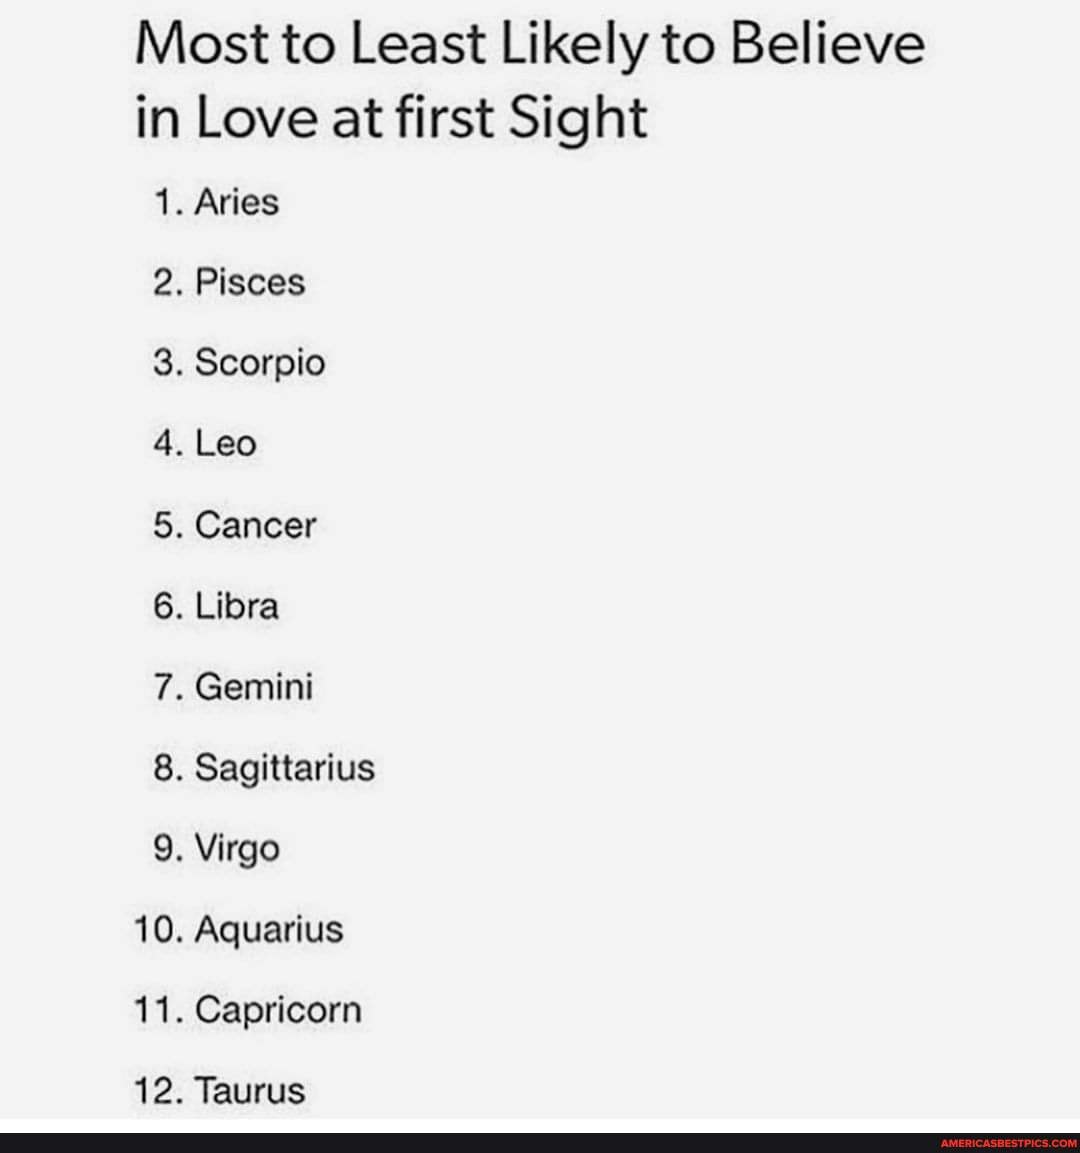 Scorpio and pisces love at first sight